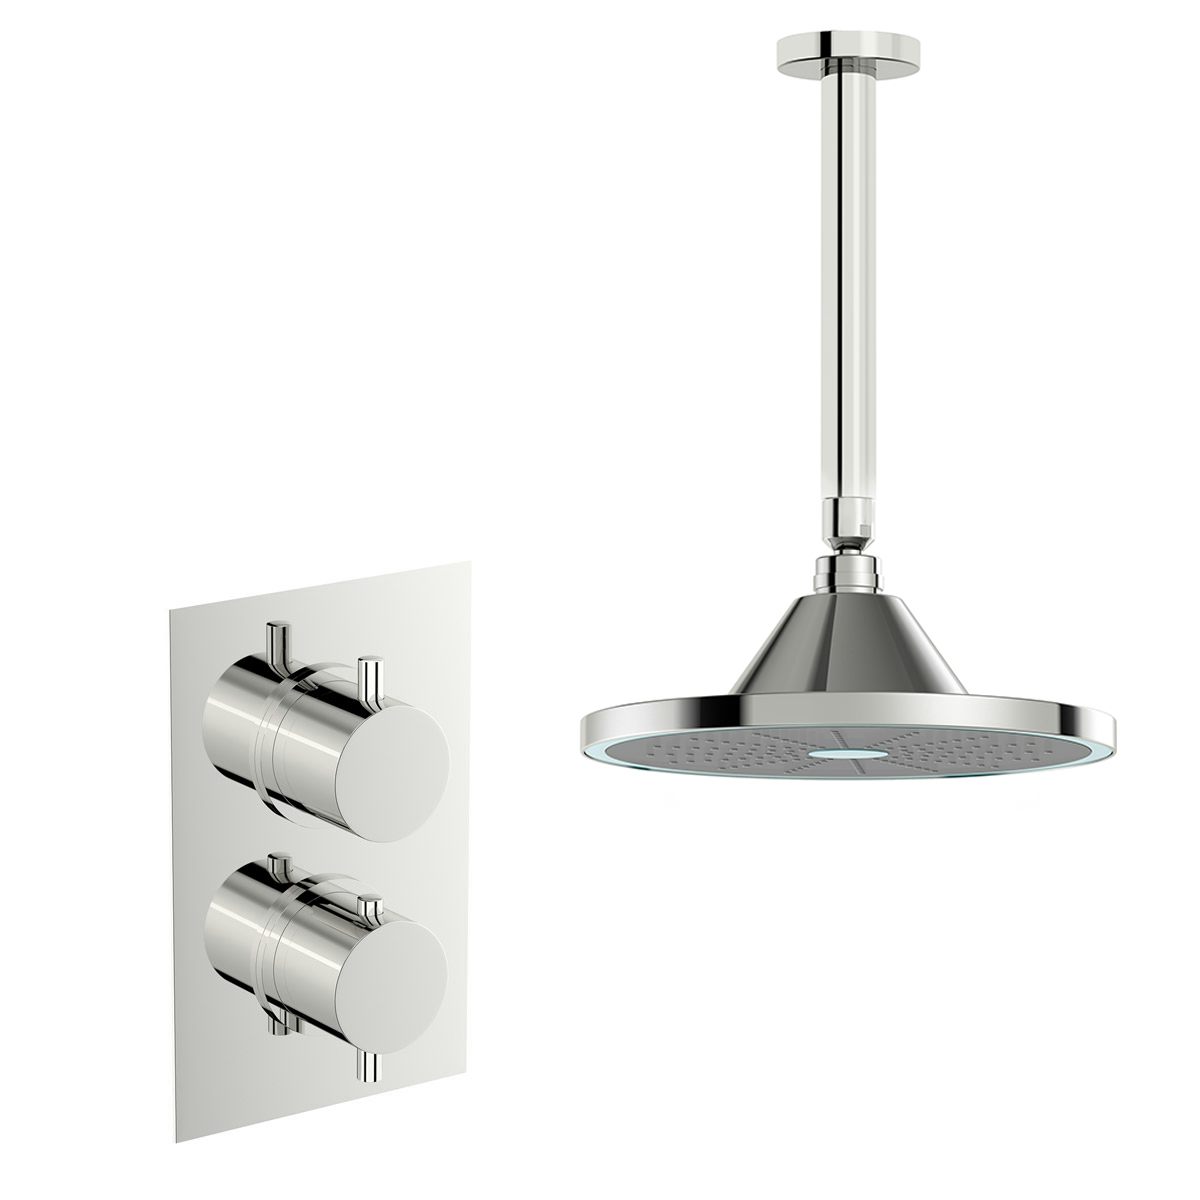 Mode Harrison twin concealed mixer shower with LED head and ceiling arm